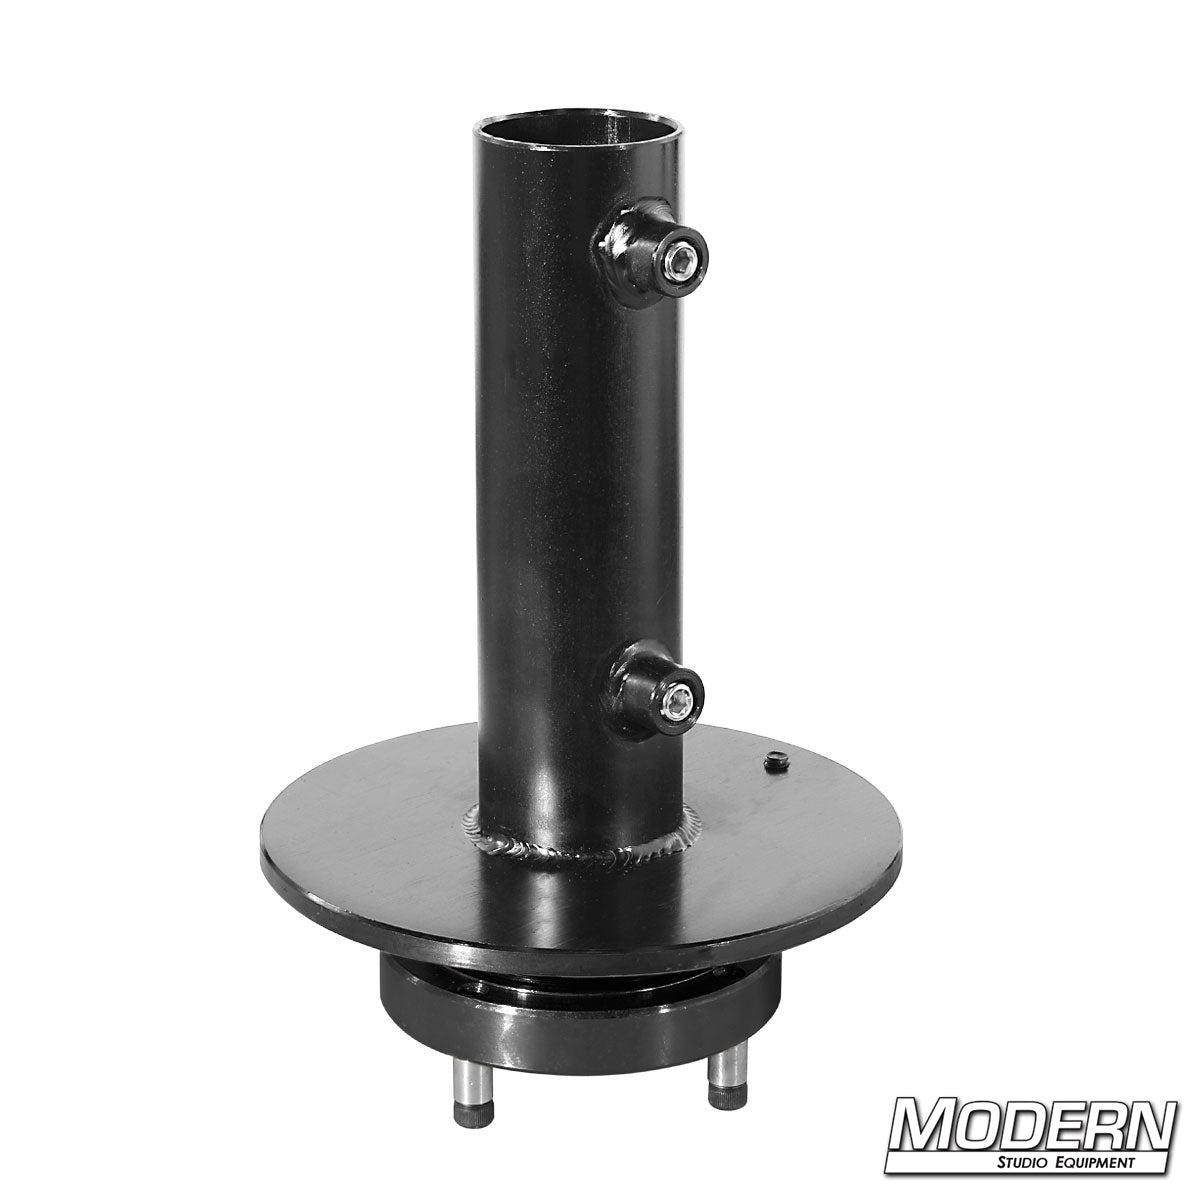 Mitchell to 1-1/4" Adapter